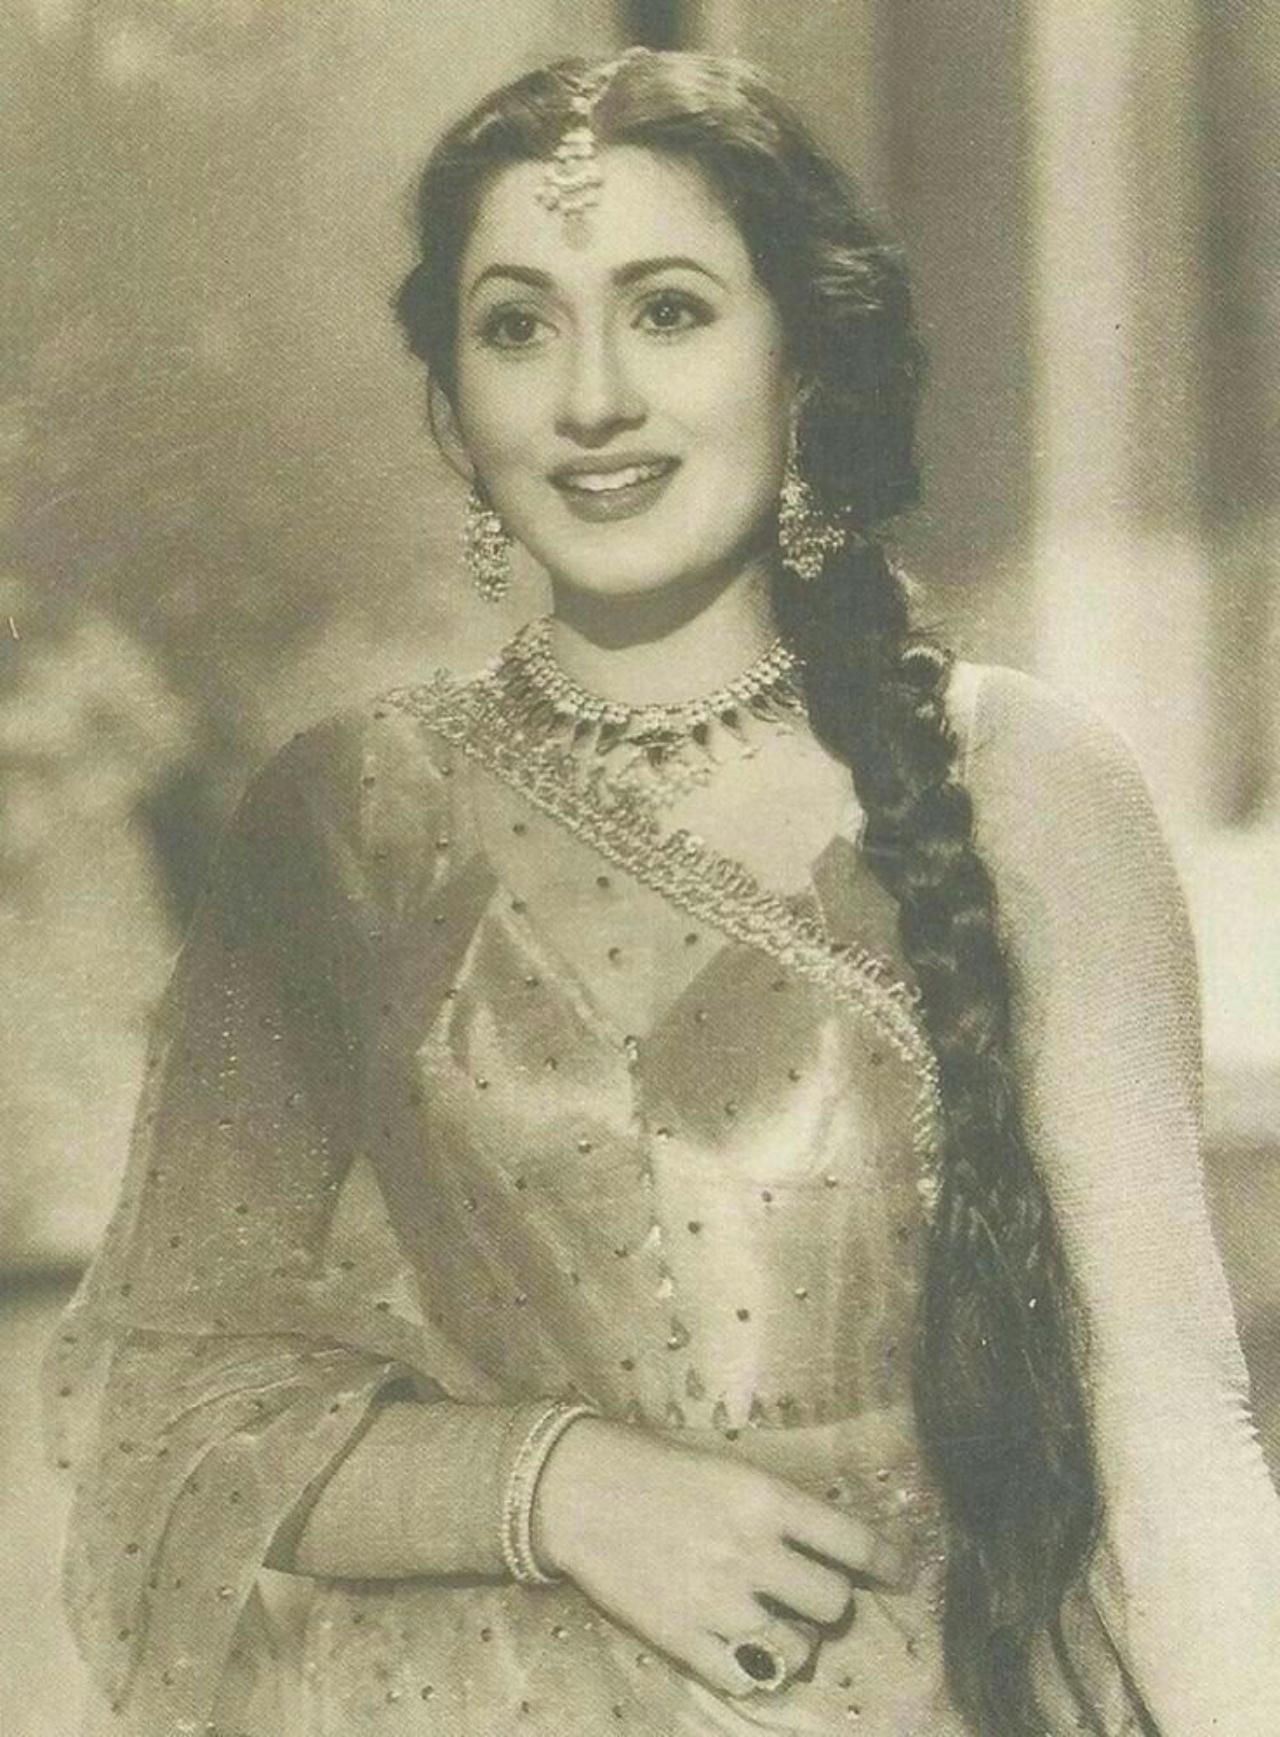 Madhubala featured as a lead actress in the film 'Neel Kamal' which also starred Raj Kapoor. She was only 14 back then.  Madhubala was credited as 'Mumtaz' in the film's credits. That was her original name. After 'Neel Kamal', she adopted Madhubala as her screen name